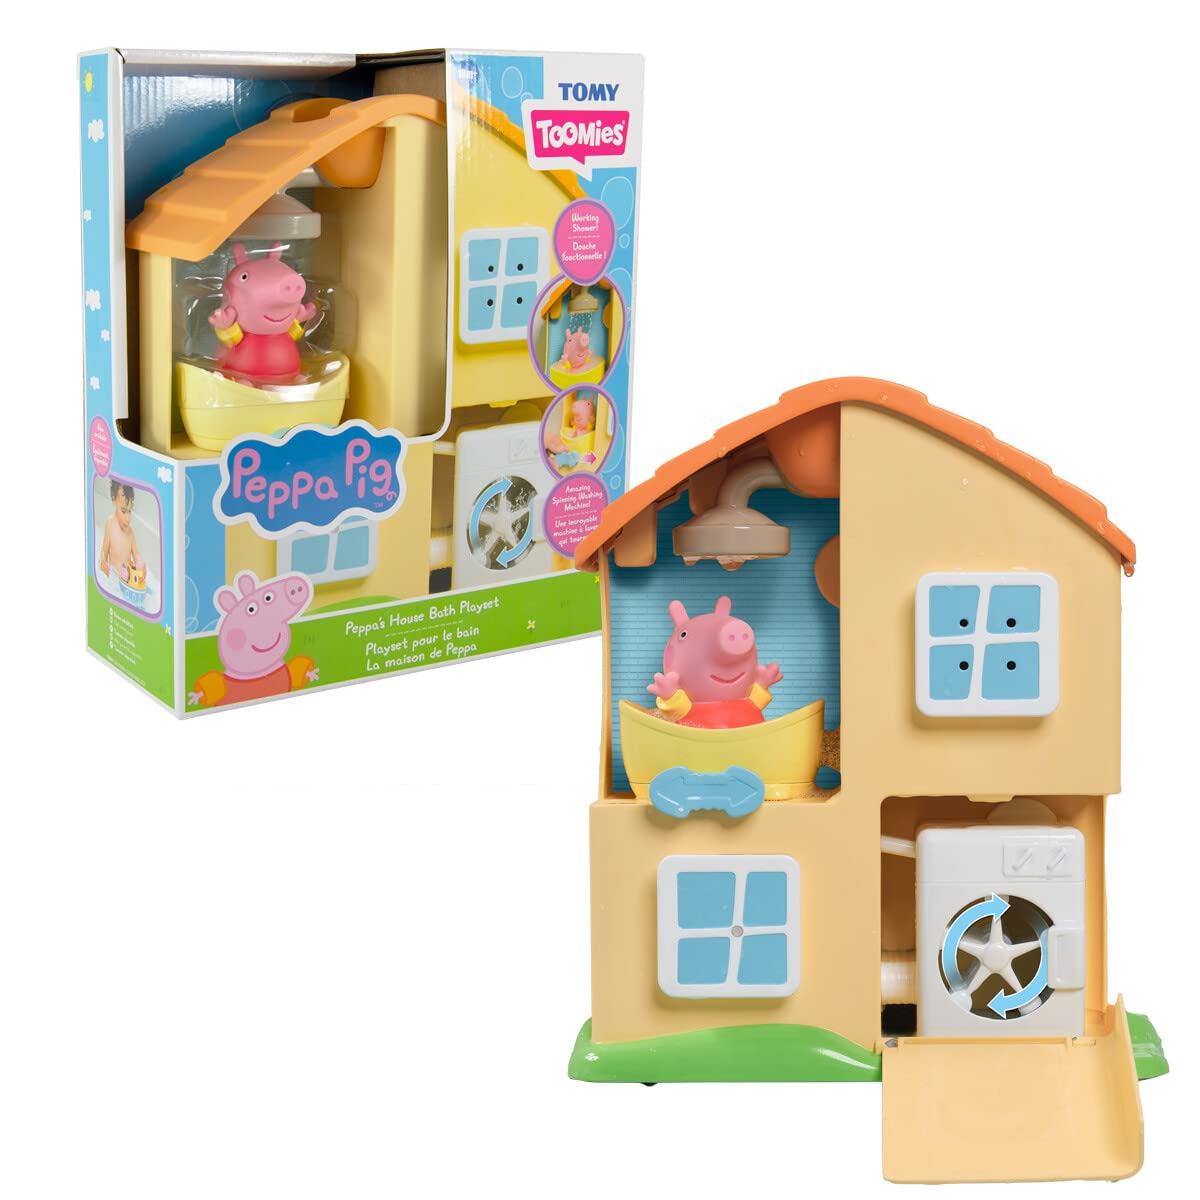 toomies Tomy Toomies Peppa Pig PeppaAs House Bath Toy Playset - Bath Time Water Play Activity center - Baby and Toddler Bath Toys for 18